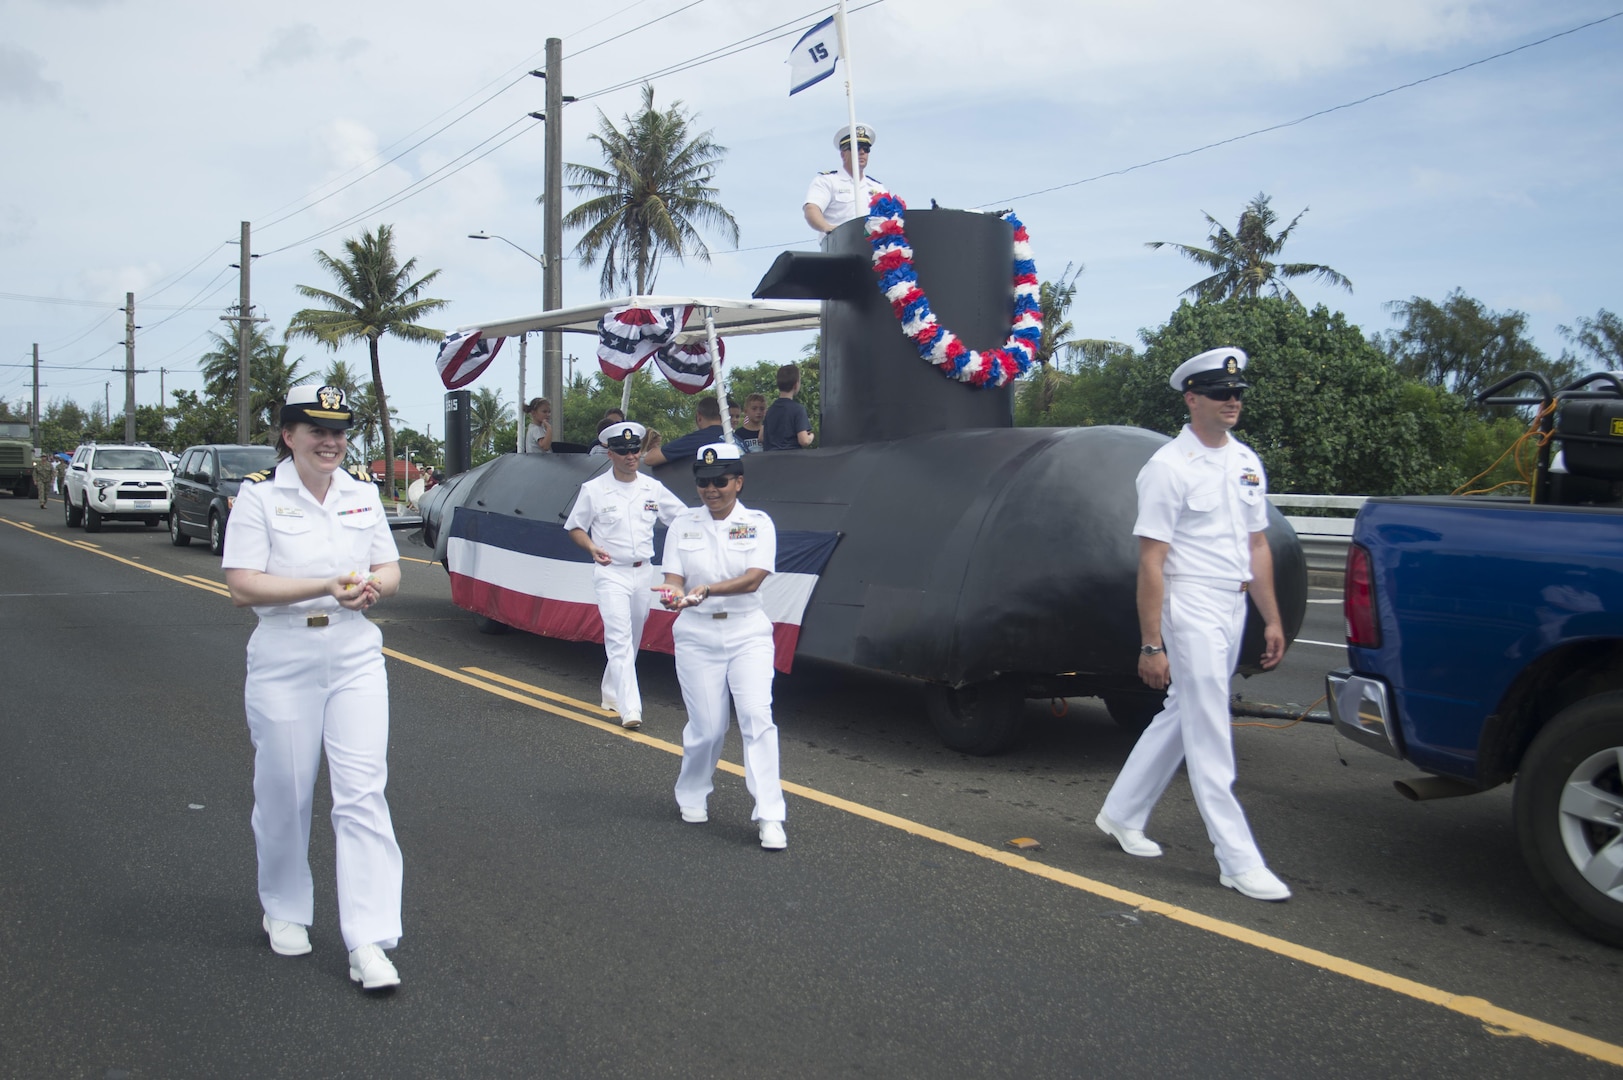 170721-N-JN506-036 HAGATNA, Guam (July 21, 2017) – Sailors from Commander, Submarine Squadron 15 march alongside the command submarine float and distribute candy during Guam's annual Liberation Day Parade in Hagatna, Guam, July 21. The 2017 Guam Liberation Parade celebrates the 73rd anniversary of the liberation of Guam from Japanese occupation by U.S. forces during World War II. (U.S. Navy photo by Mass Communication Specialist 1st Class Jamica Johnson/Released)